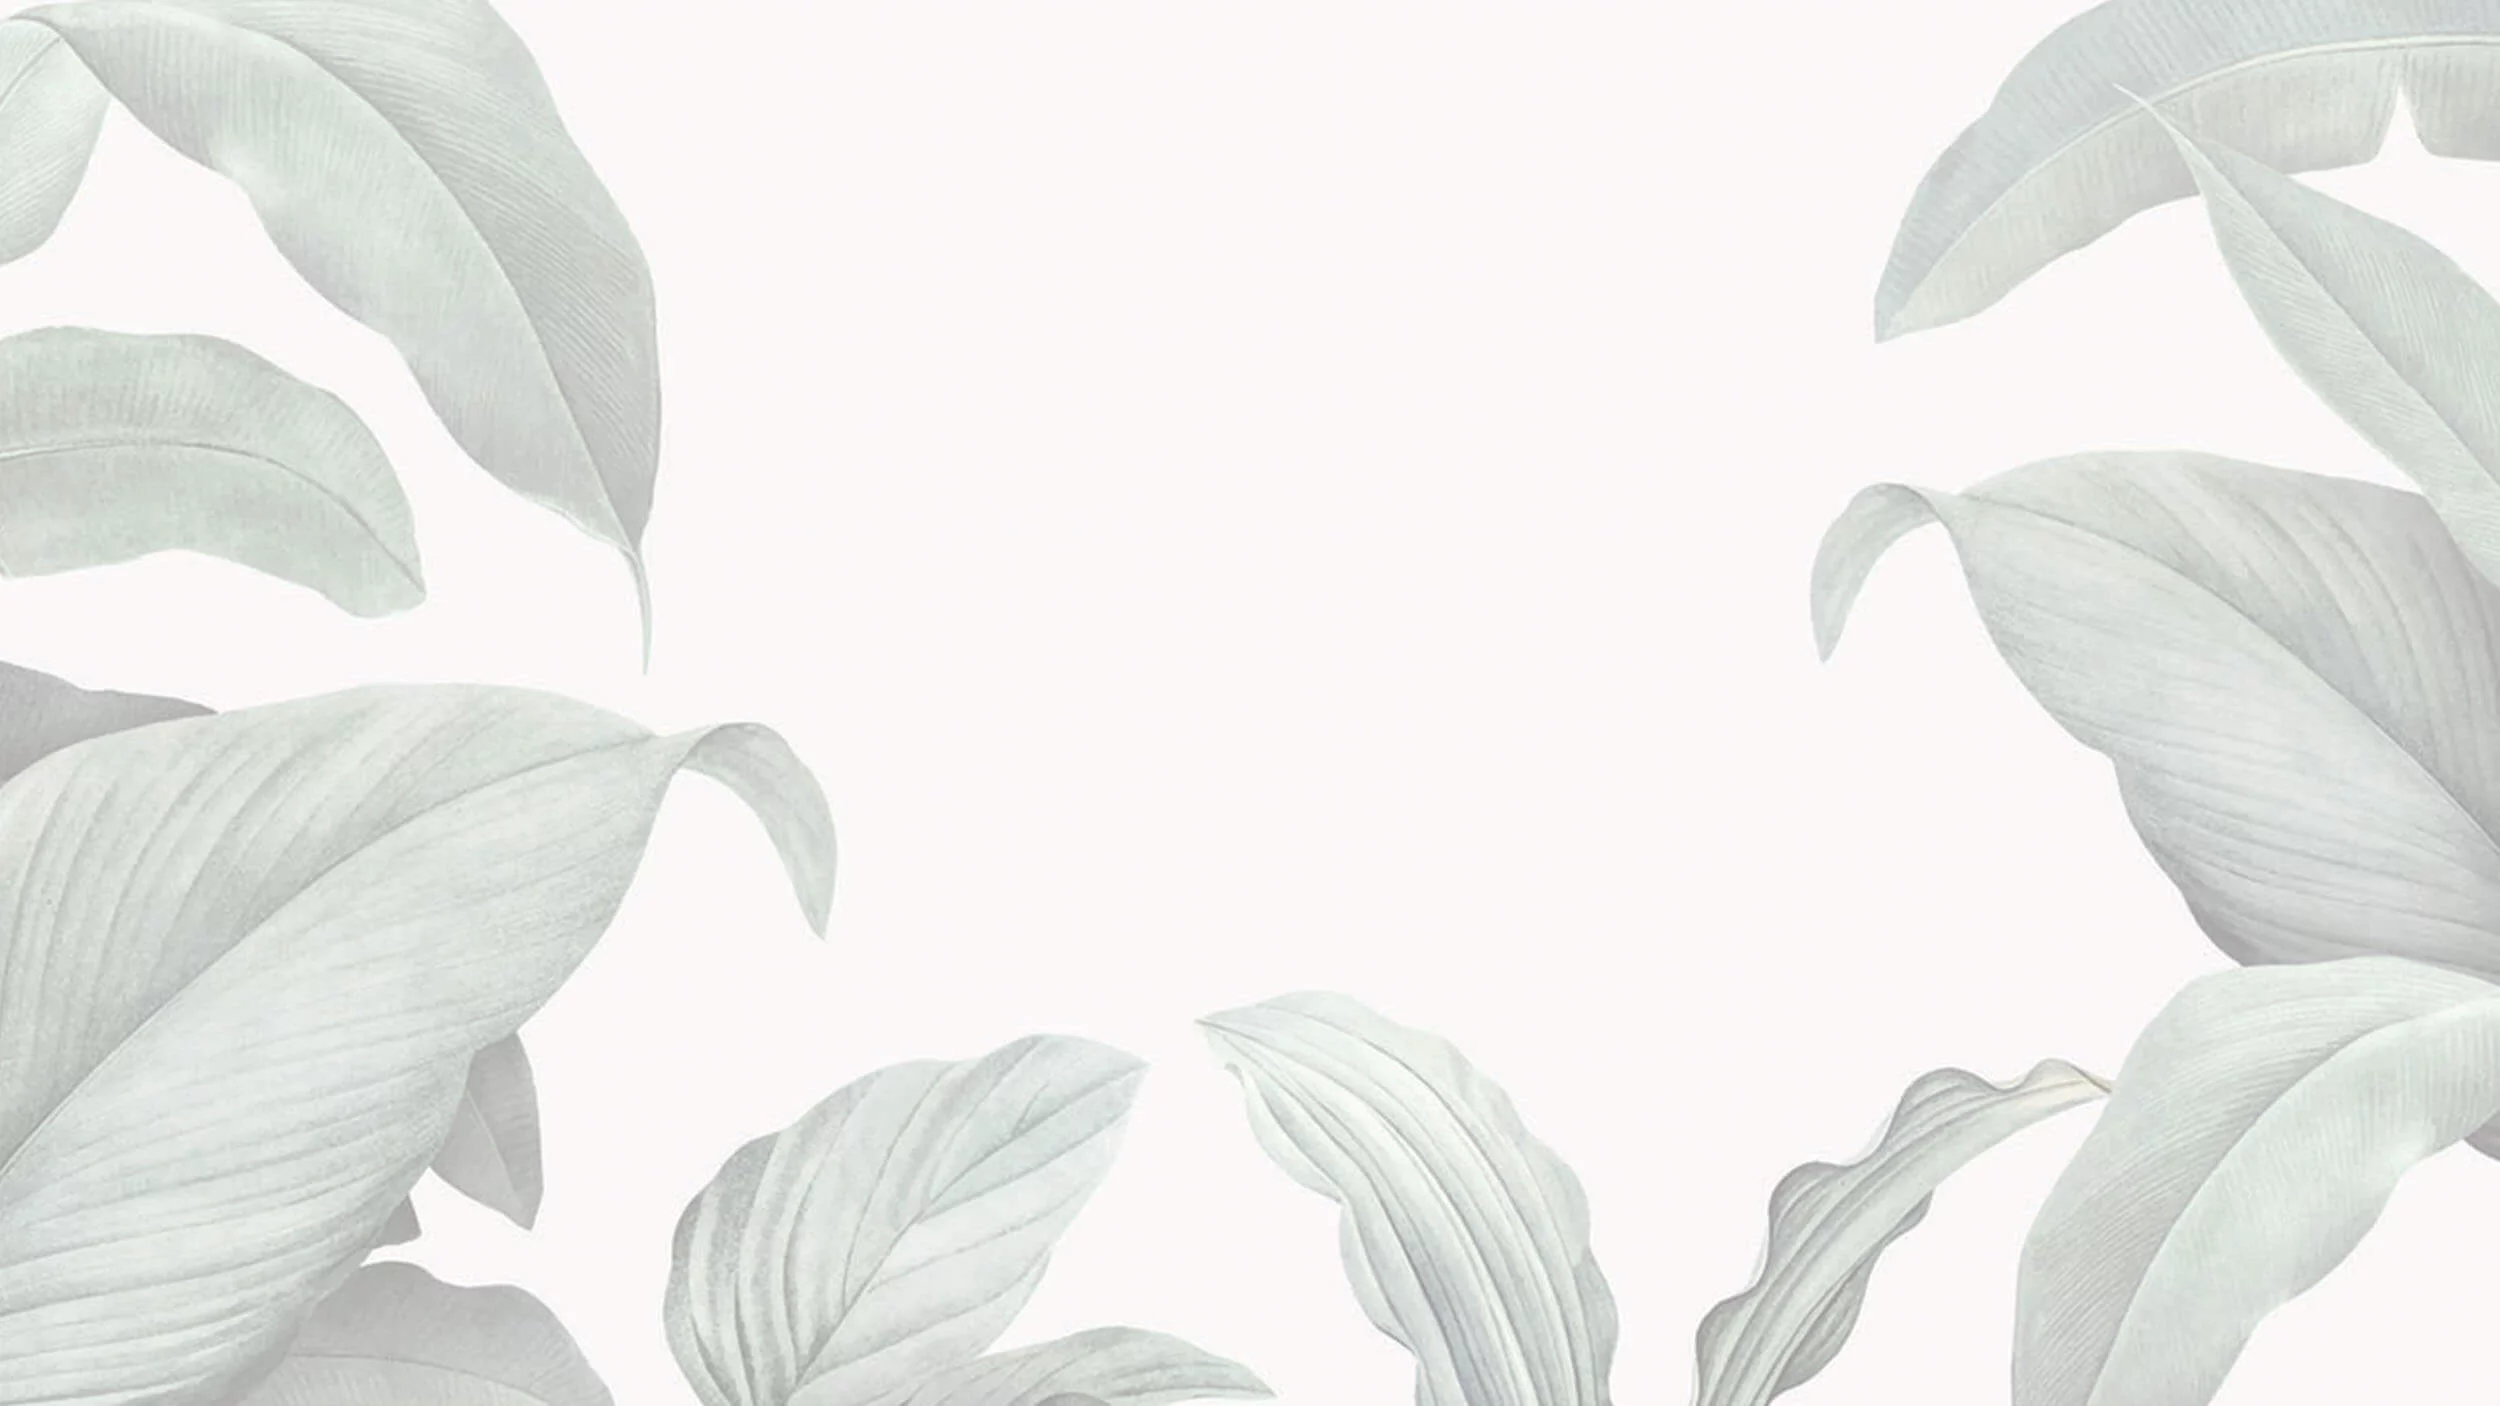 Background image with leaves